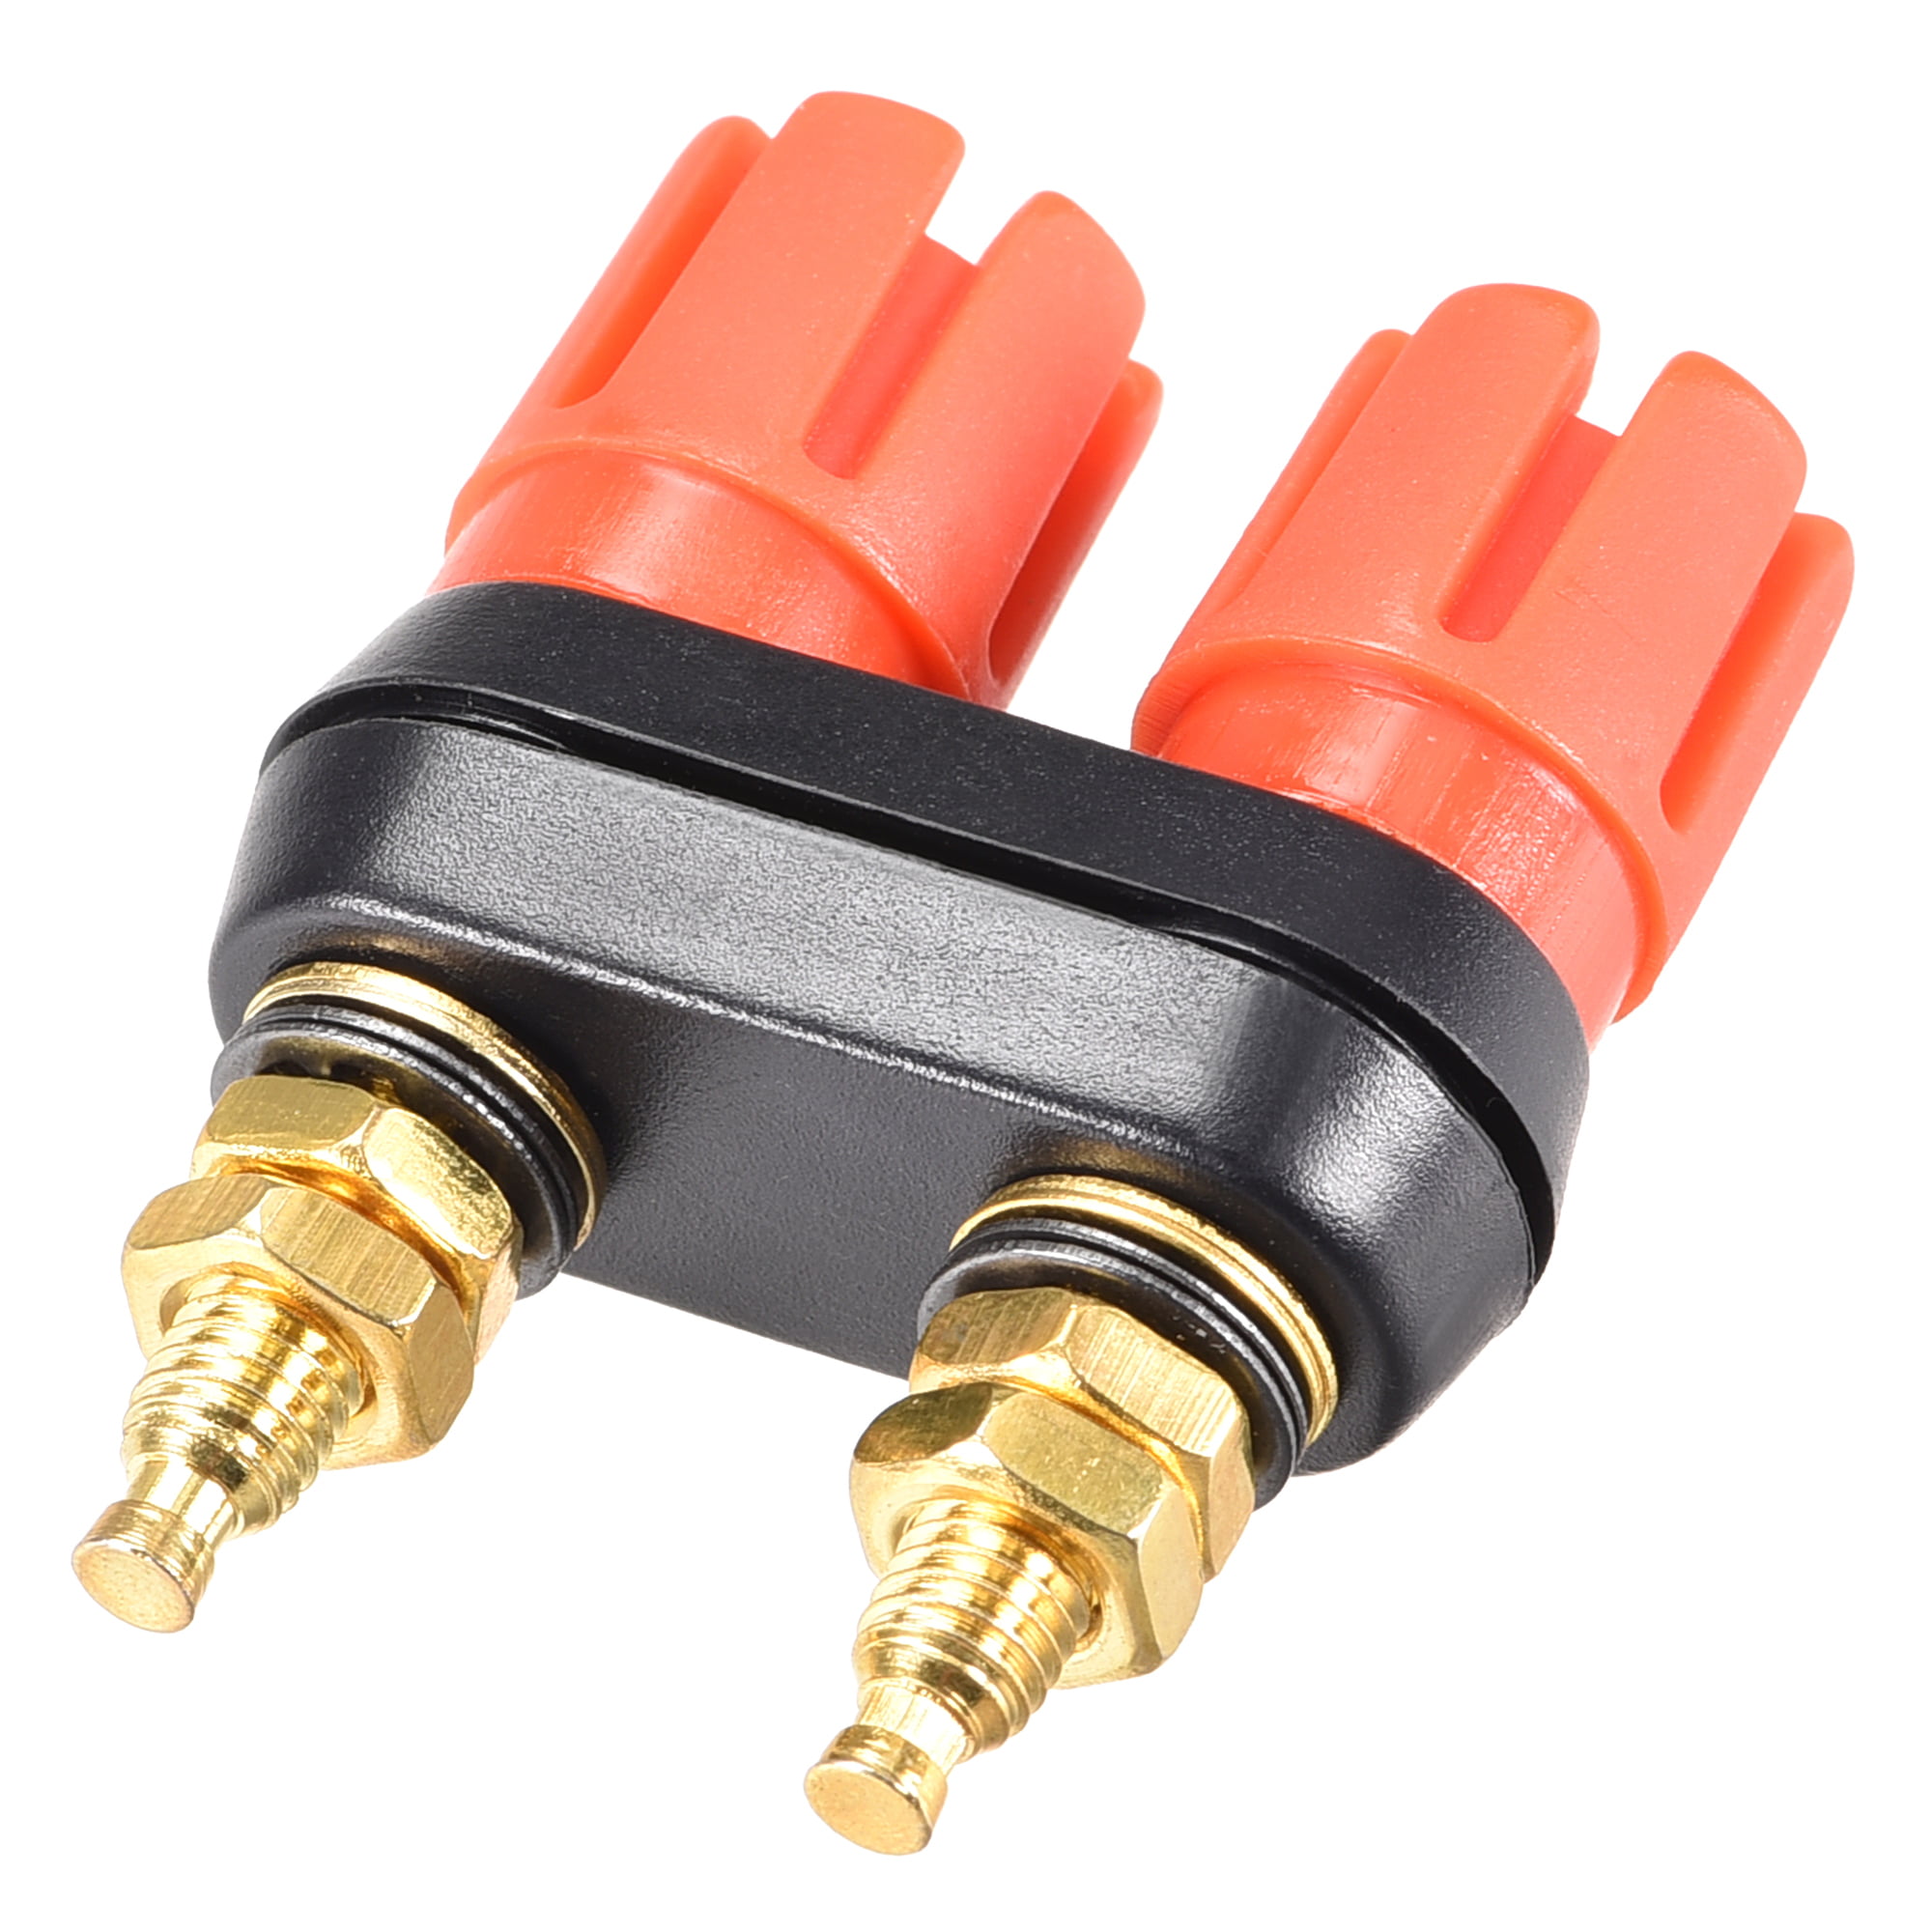 DUAL GOLD PLATED SPEAKER/SUB TERMINAL BANANA PLUG JACK UP TO 8 GAUGE WIRE 